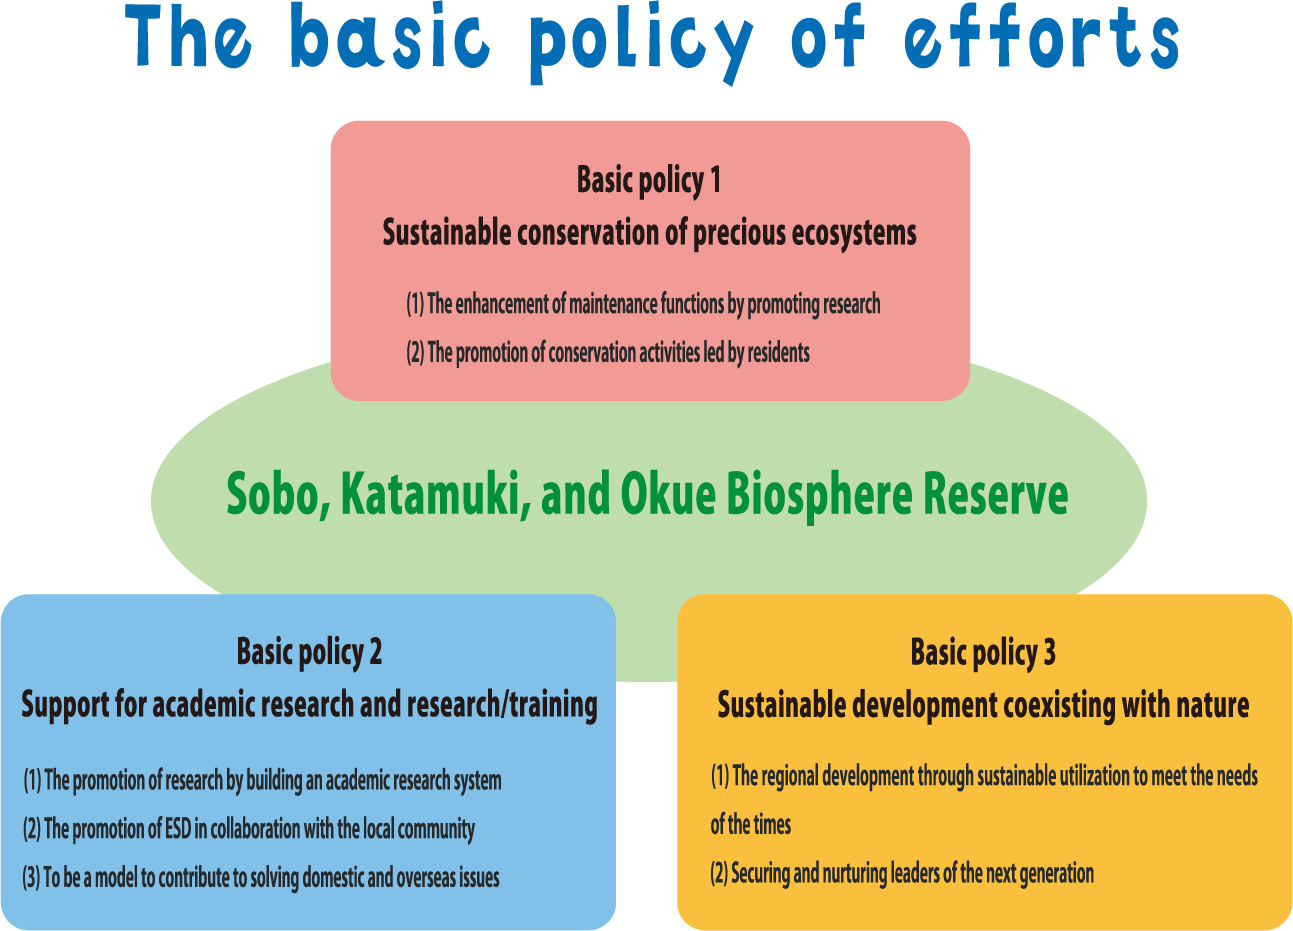 The basic policy of efforts